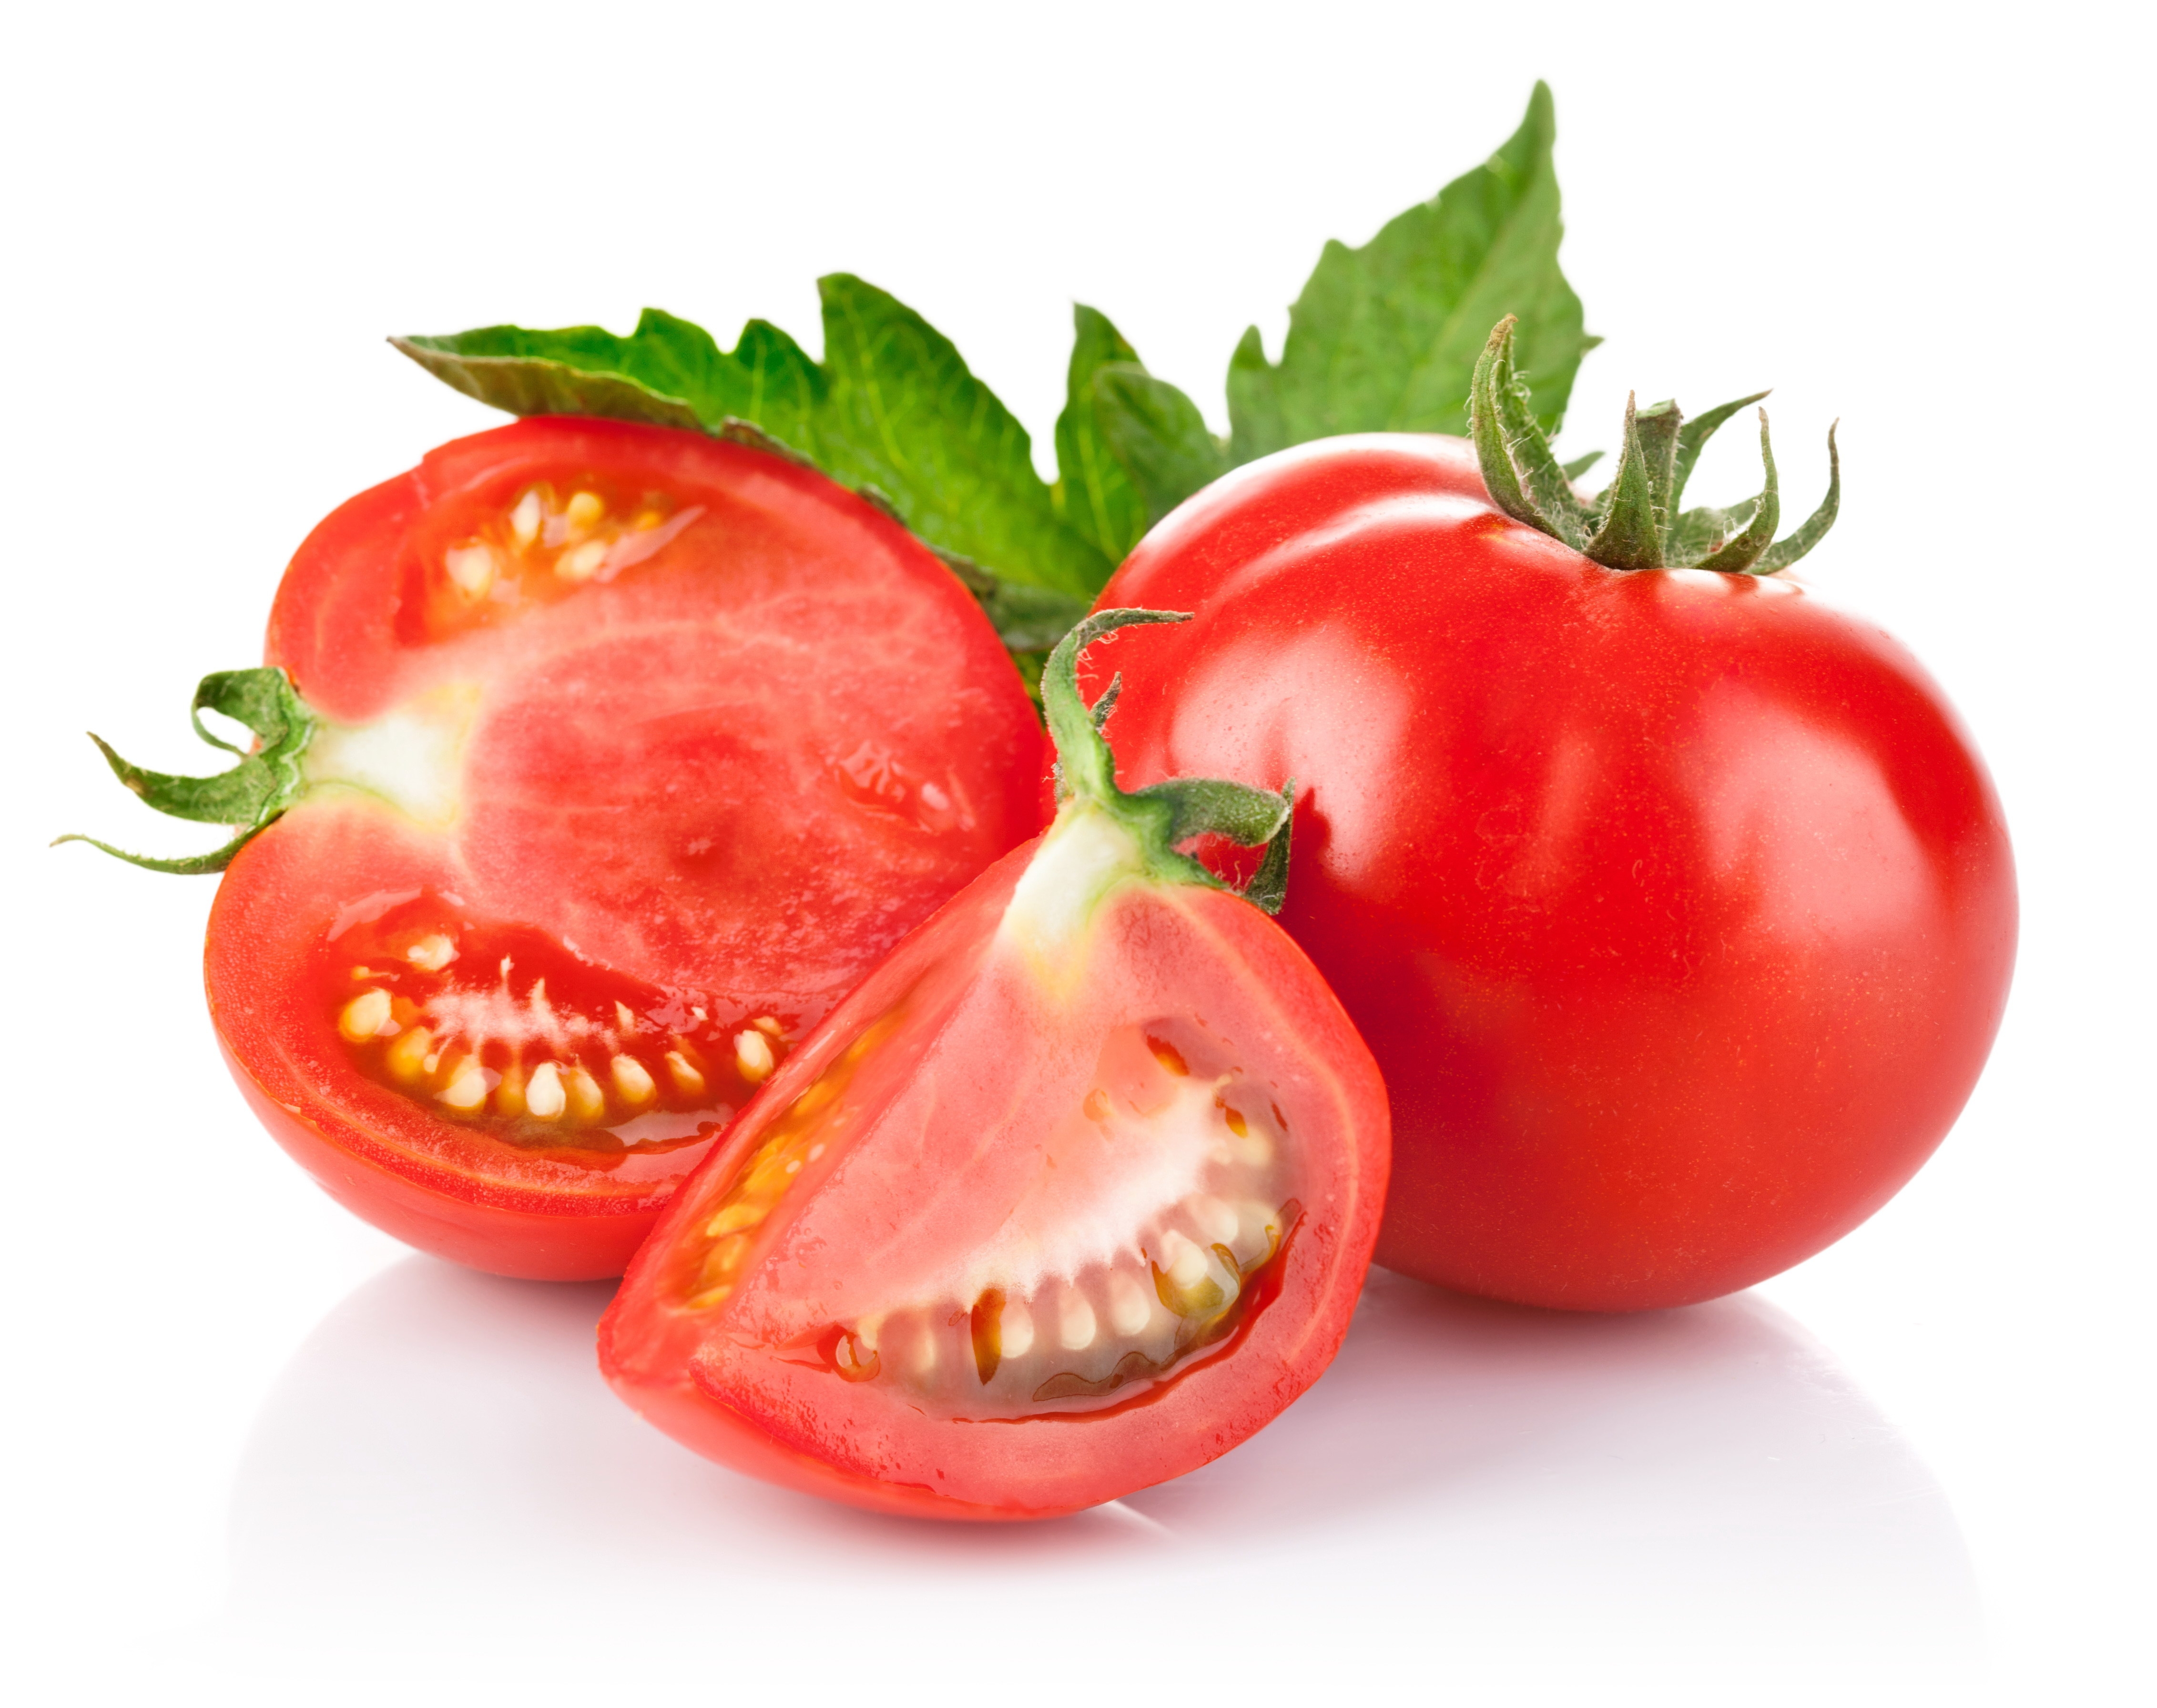 A red tomato in a slice